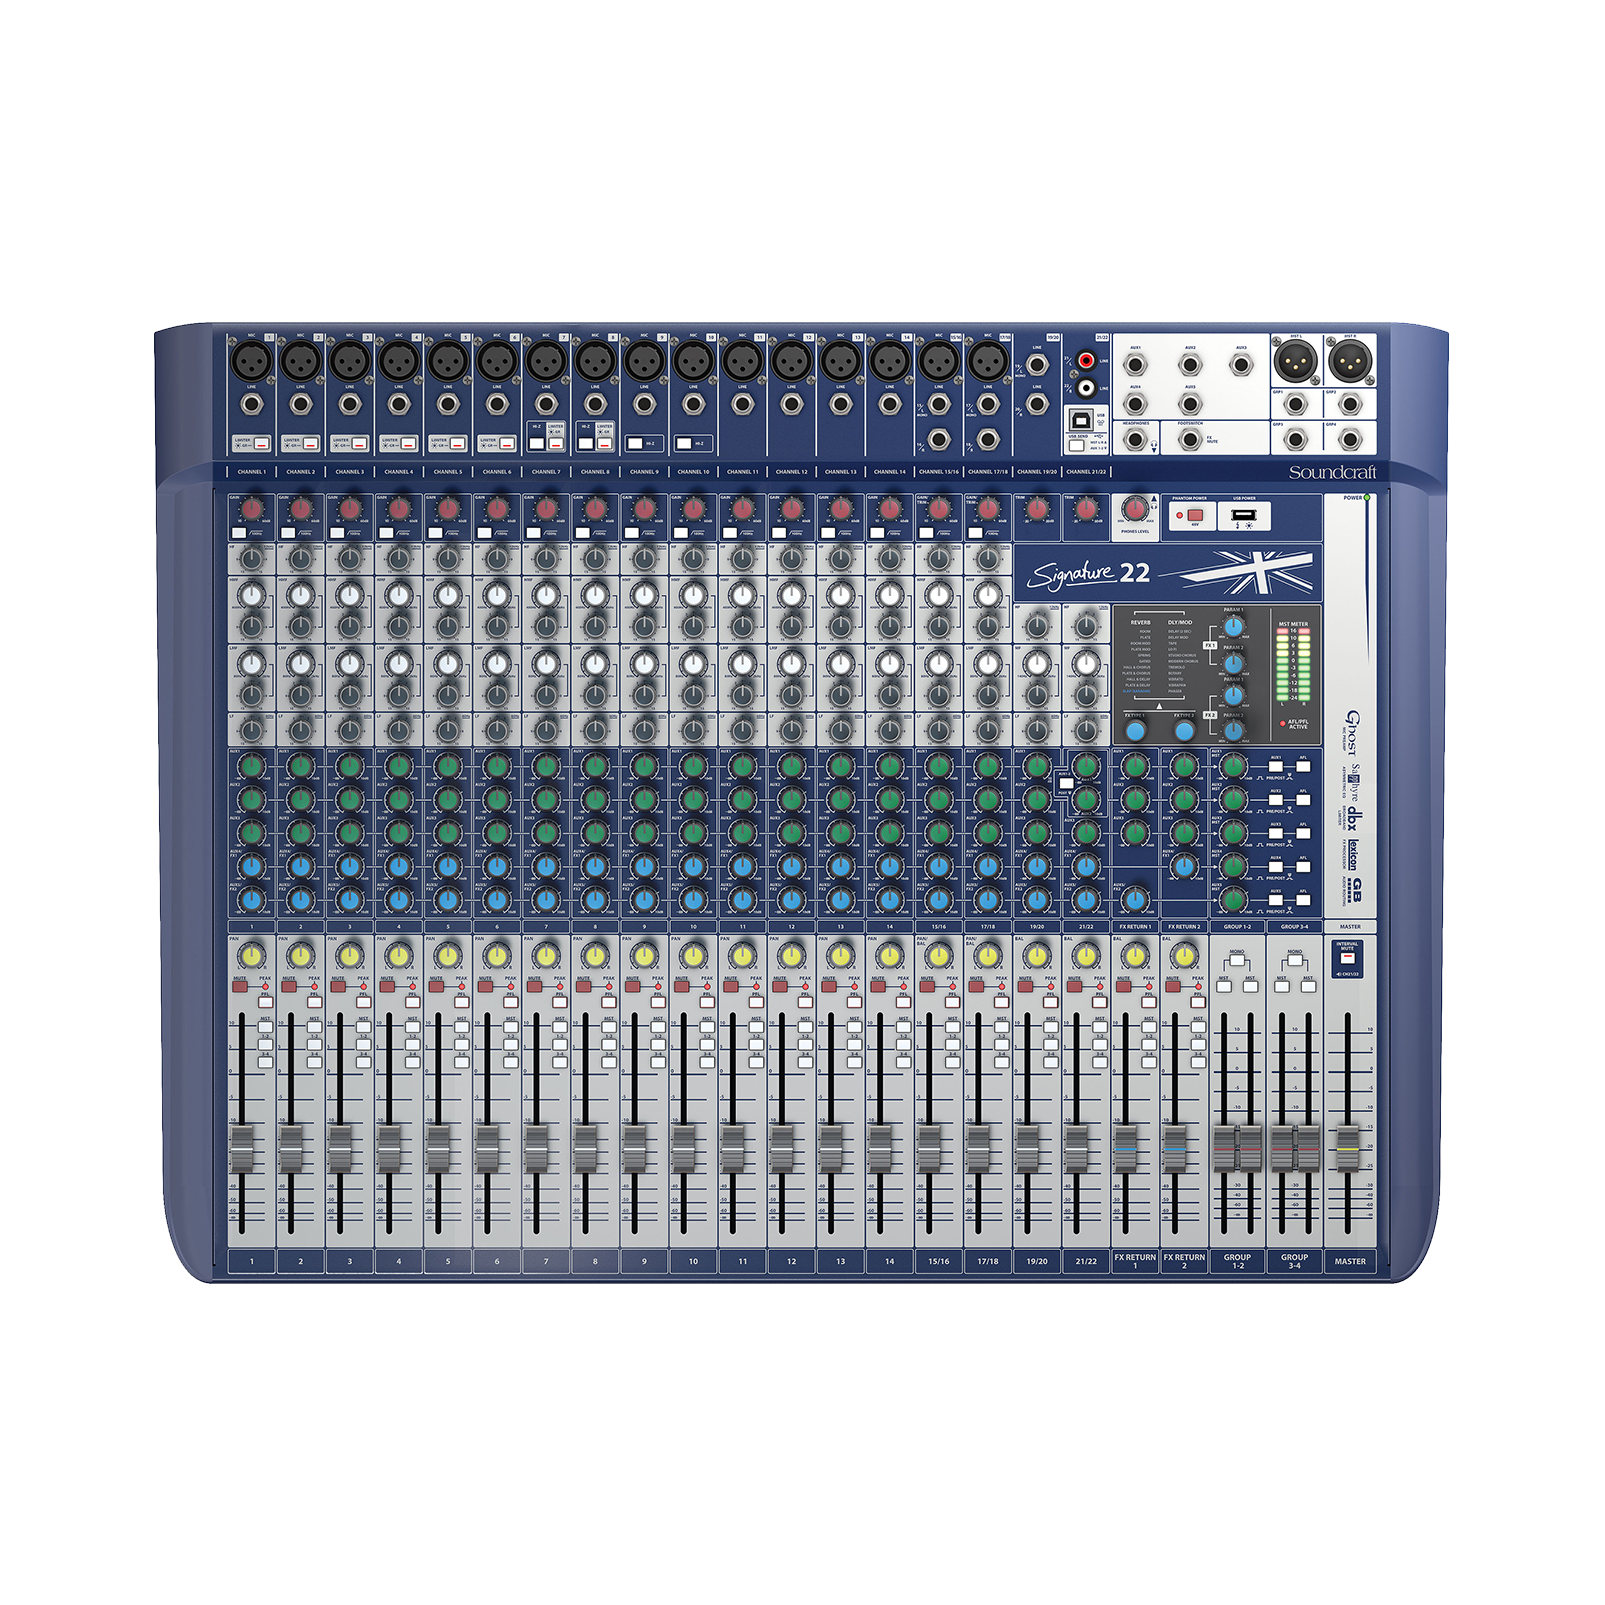 Signature 22 - Dark Blue - 22-input analogue mixer with onboard effects - Front